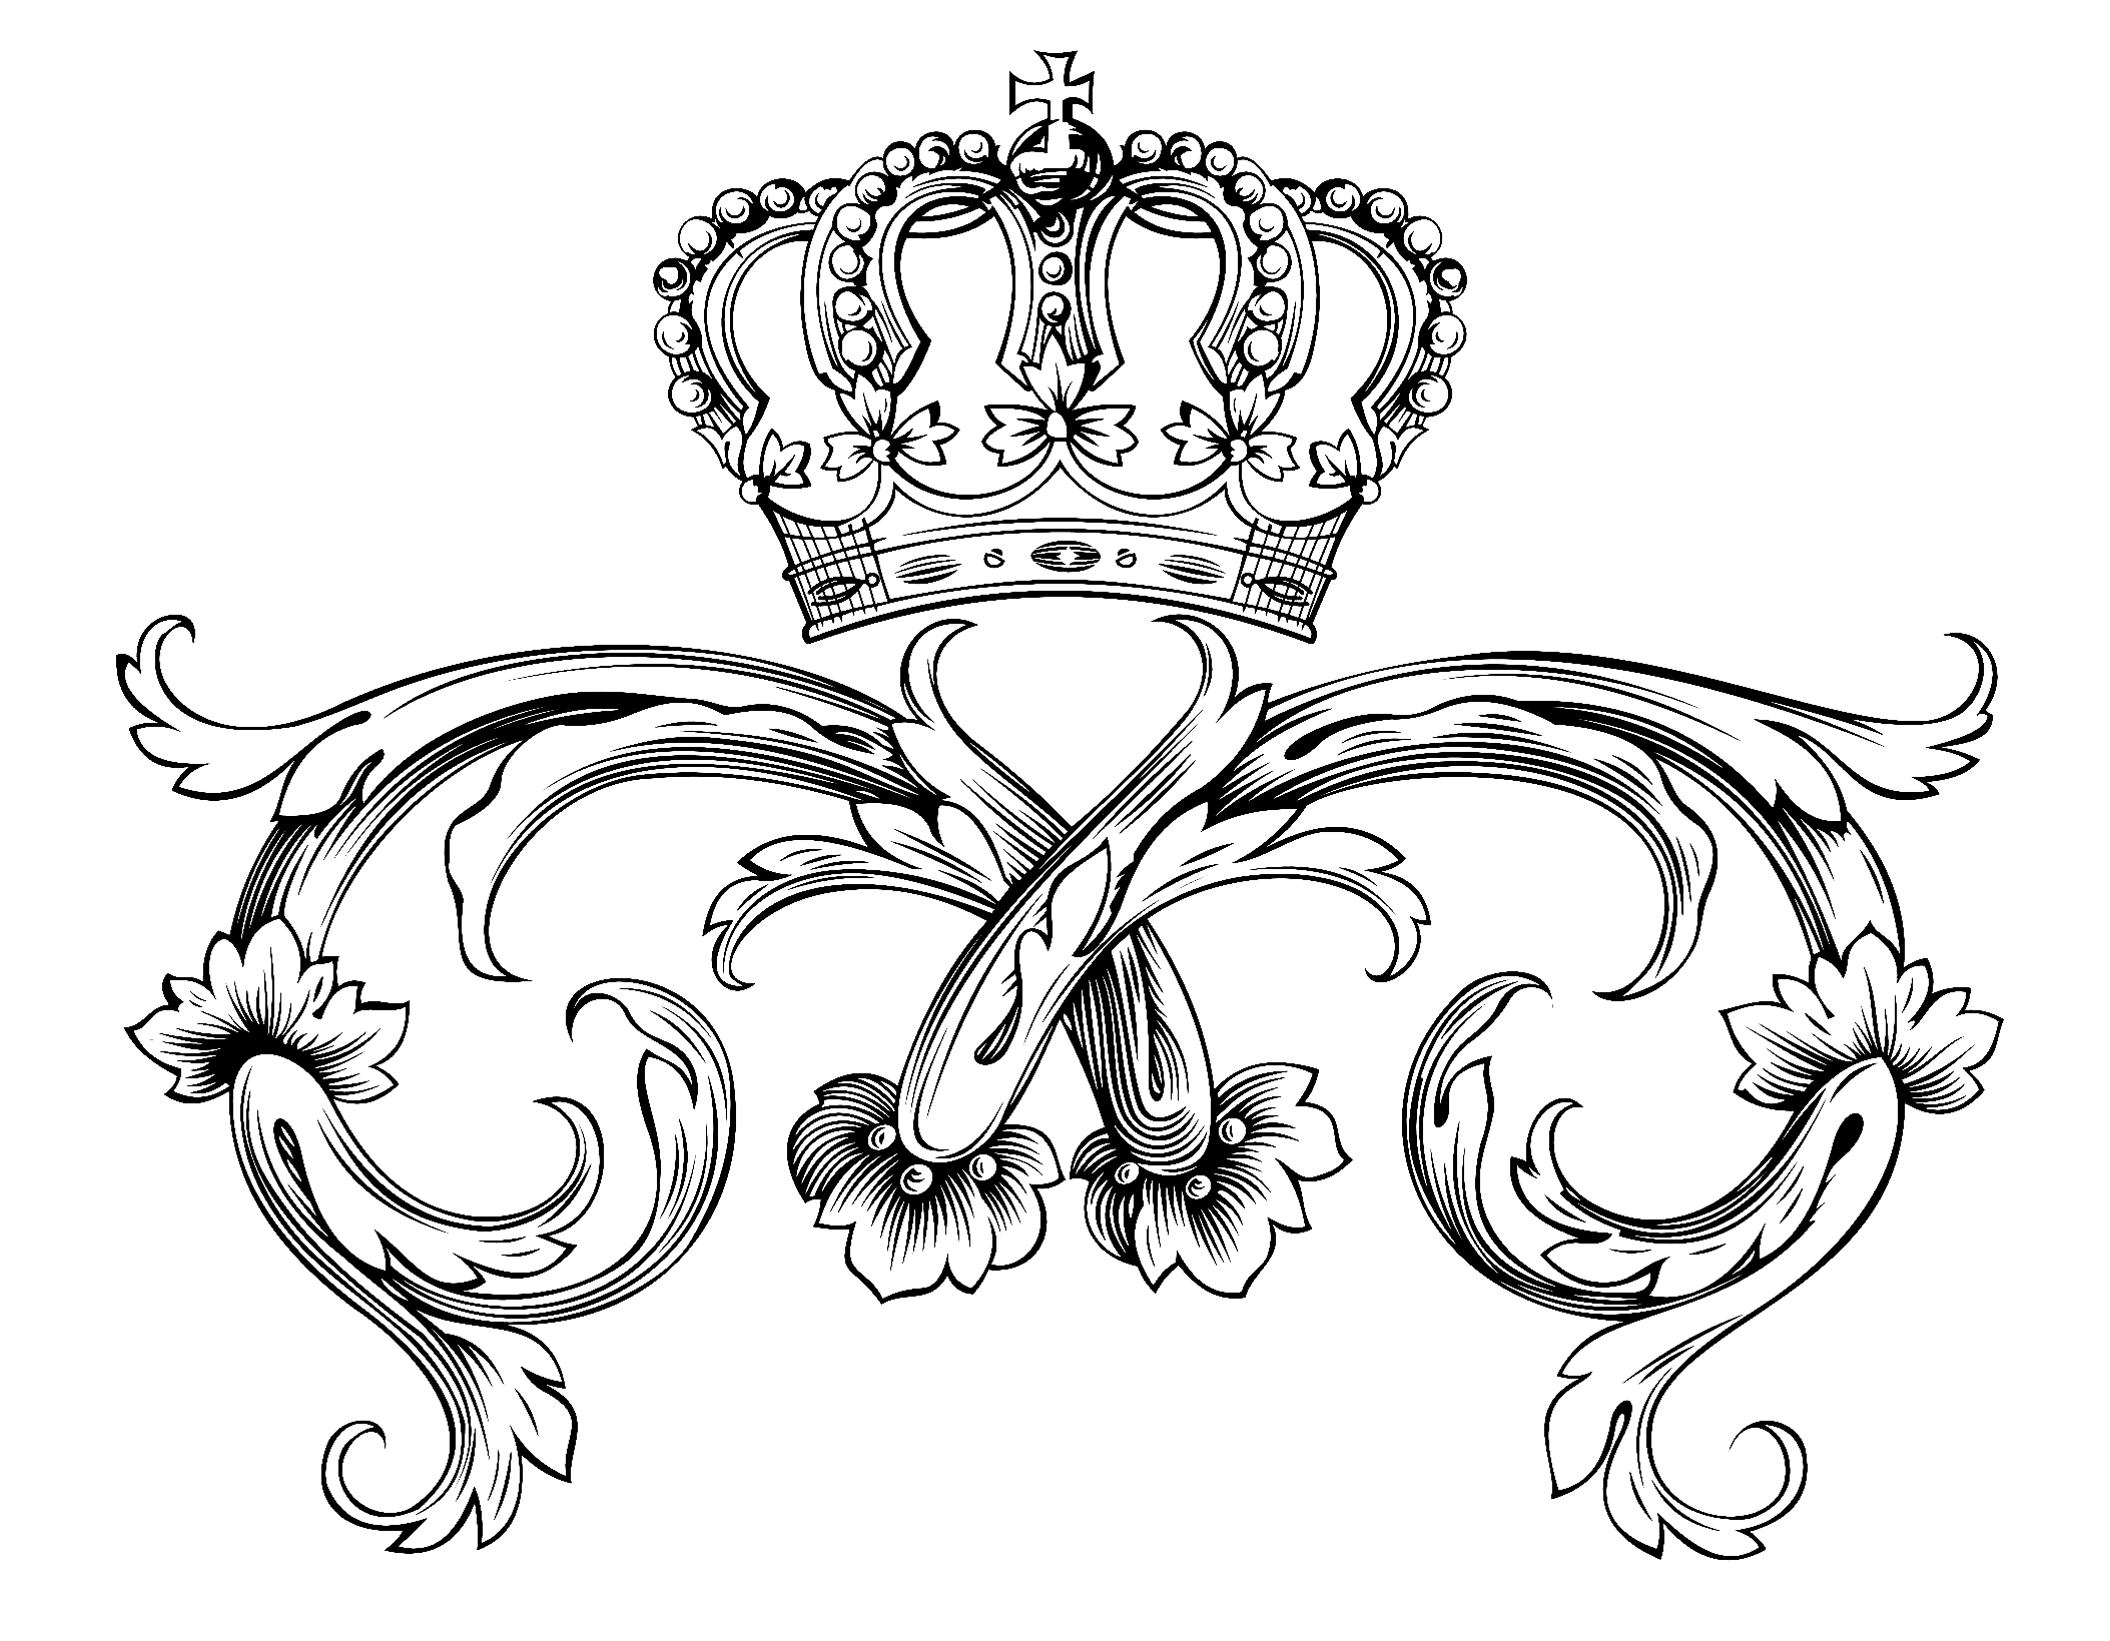 Royal - Coloring pages for adults : coloring-adult-symbol ...